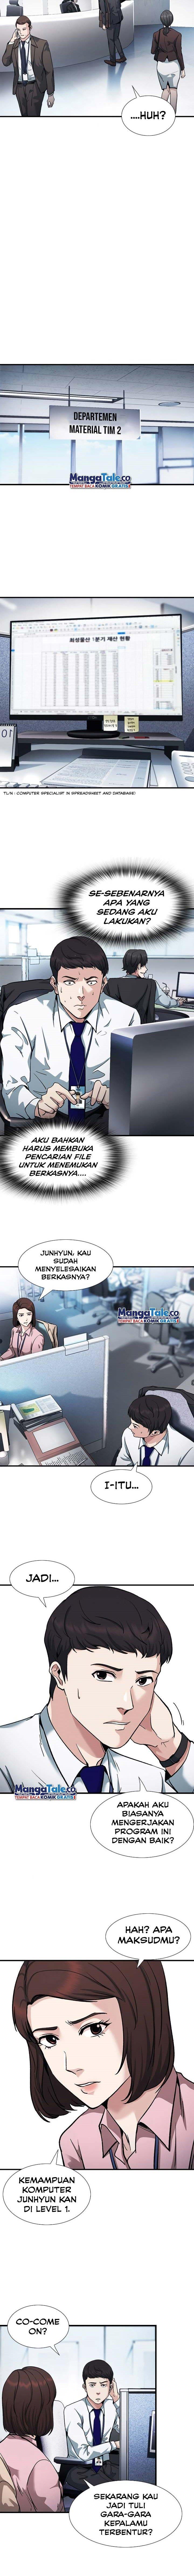 Chairman Kang, The New Employee Chapter 3